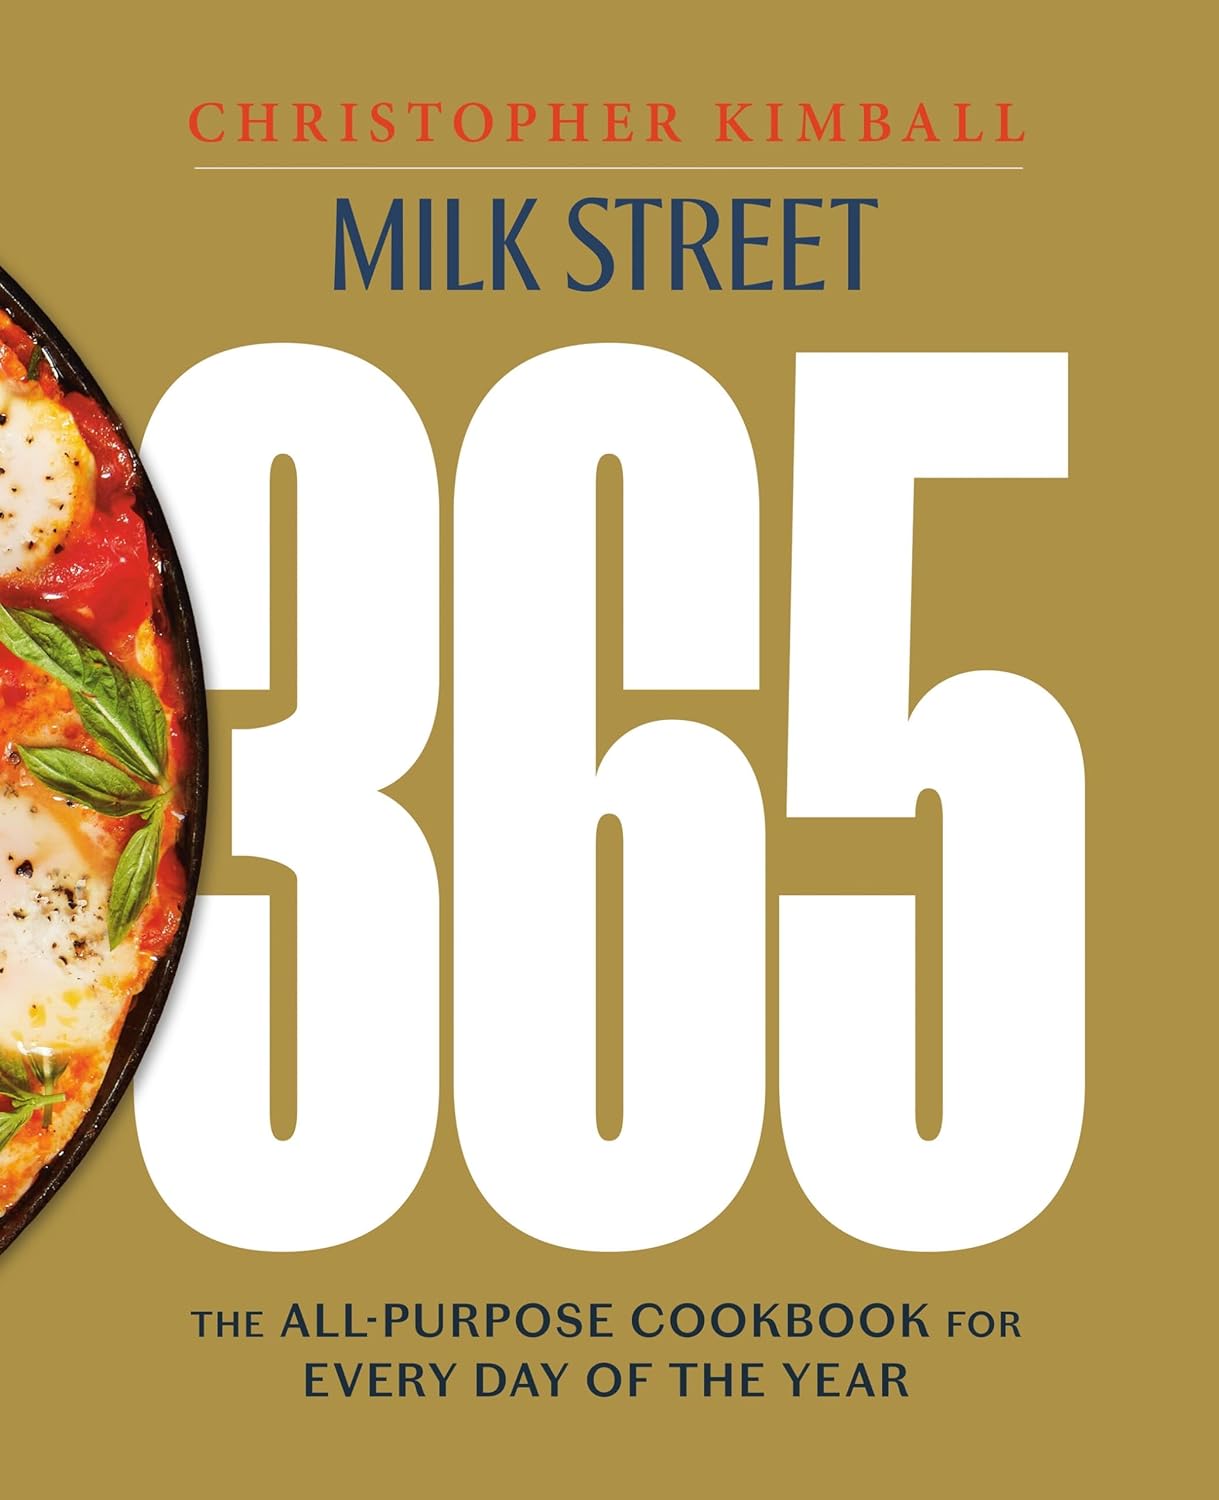 Milk Street 365: The All-Purpose Cookbook for Every Day of the Year (Christopher Kimball)